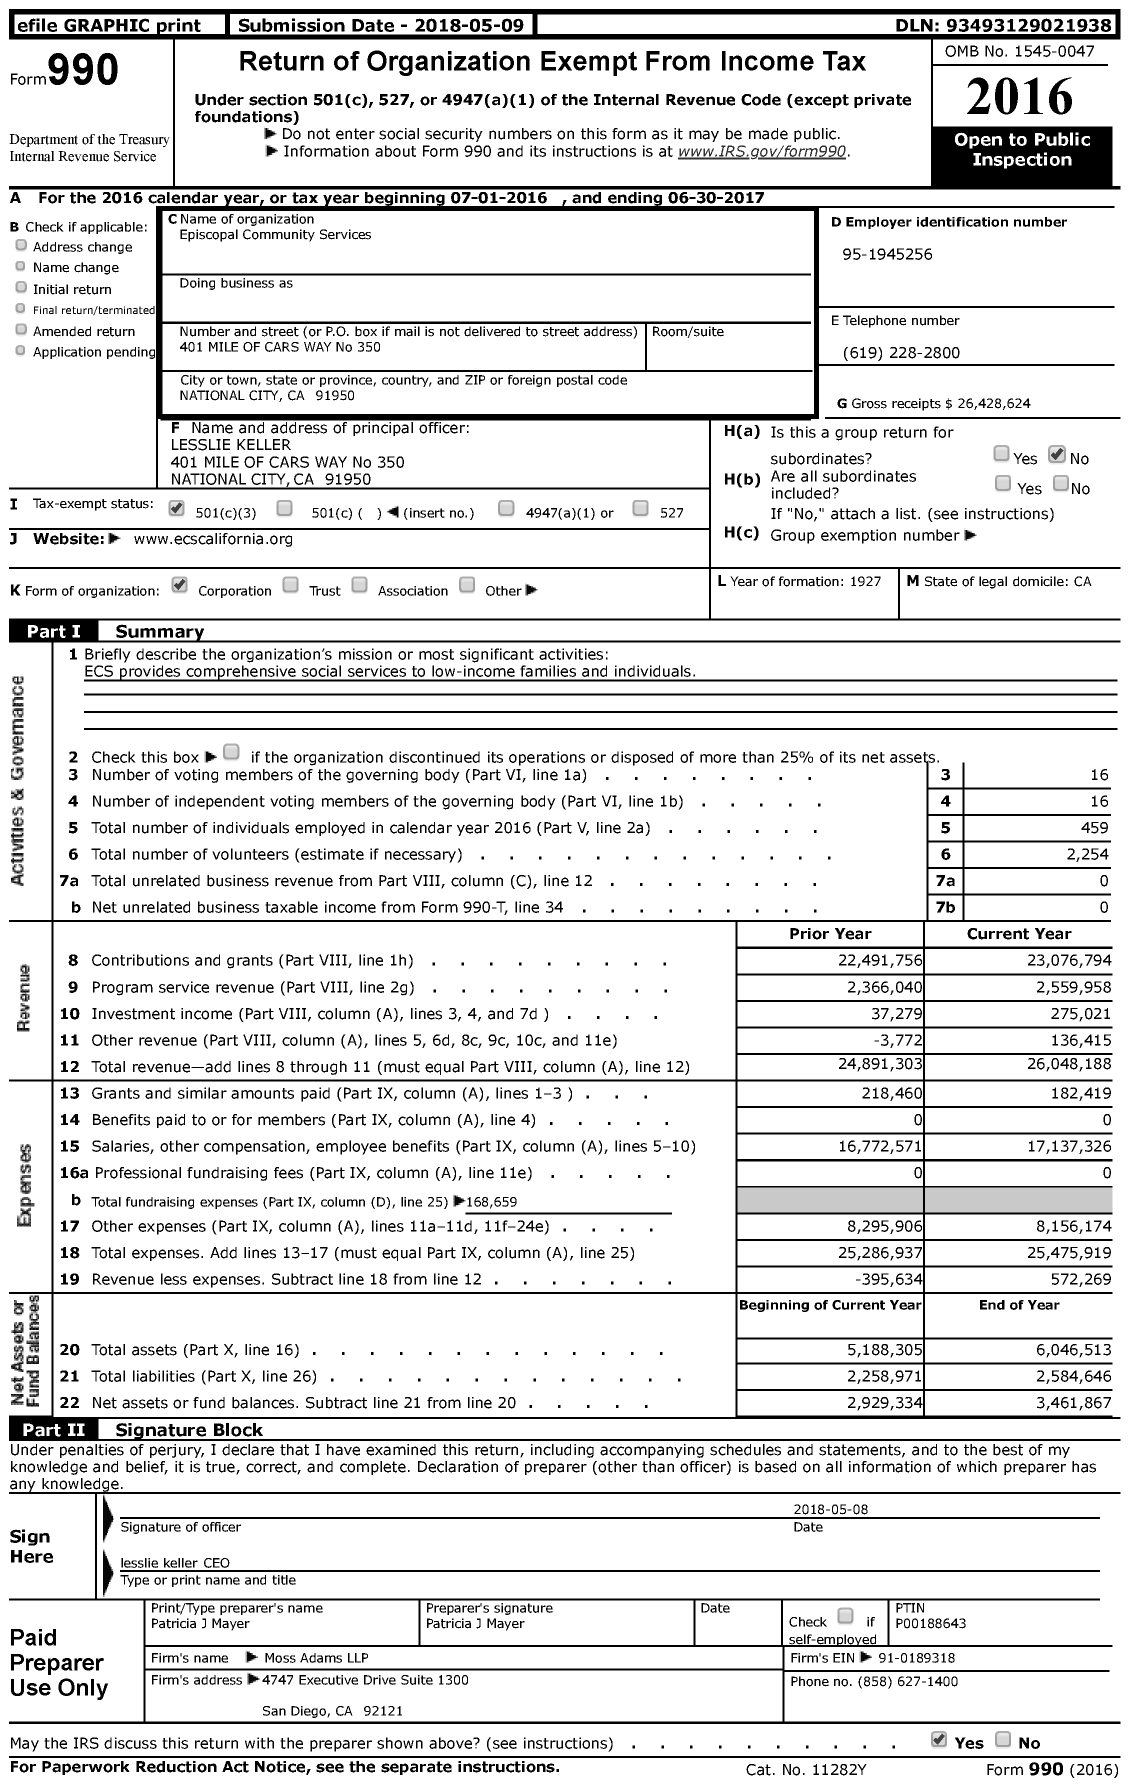 Image of first page of 2016 Form 990 for Episcopal Community Services (ECS)